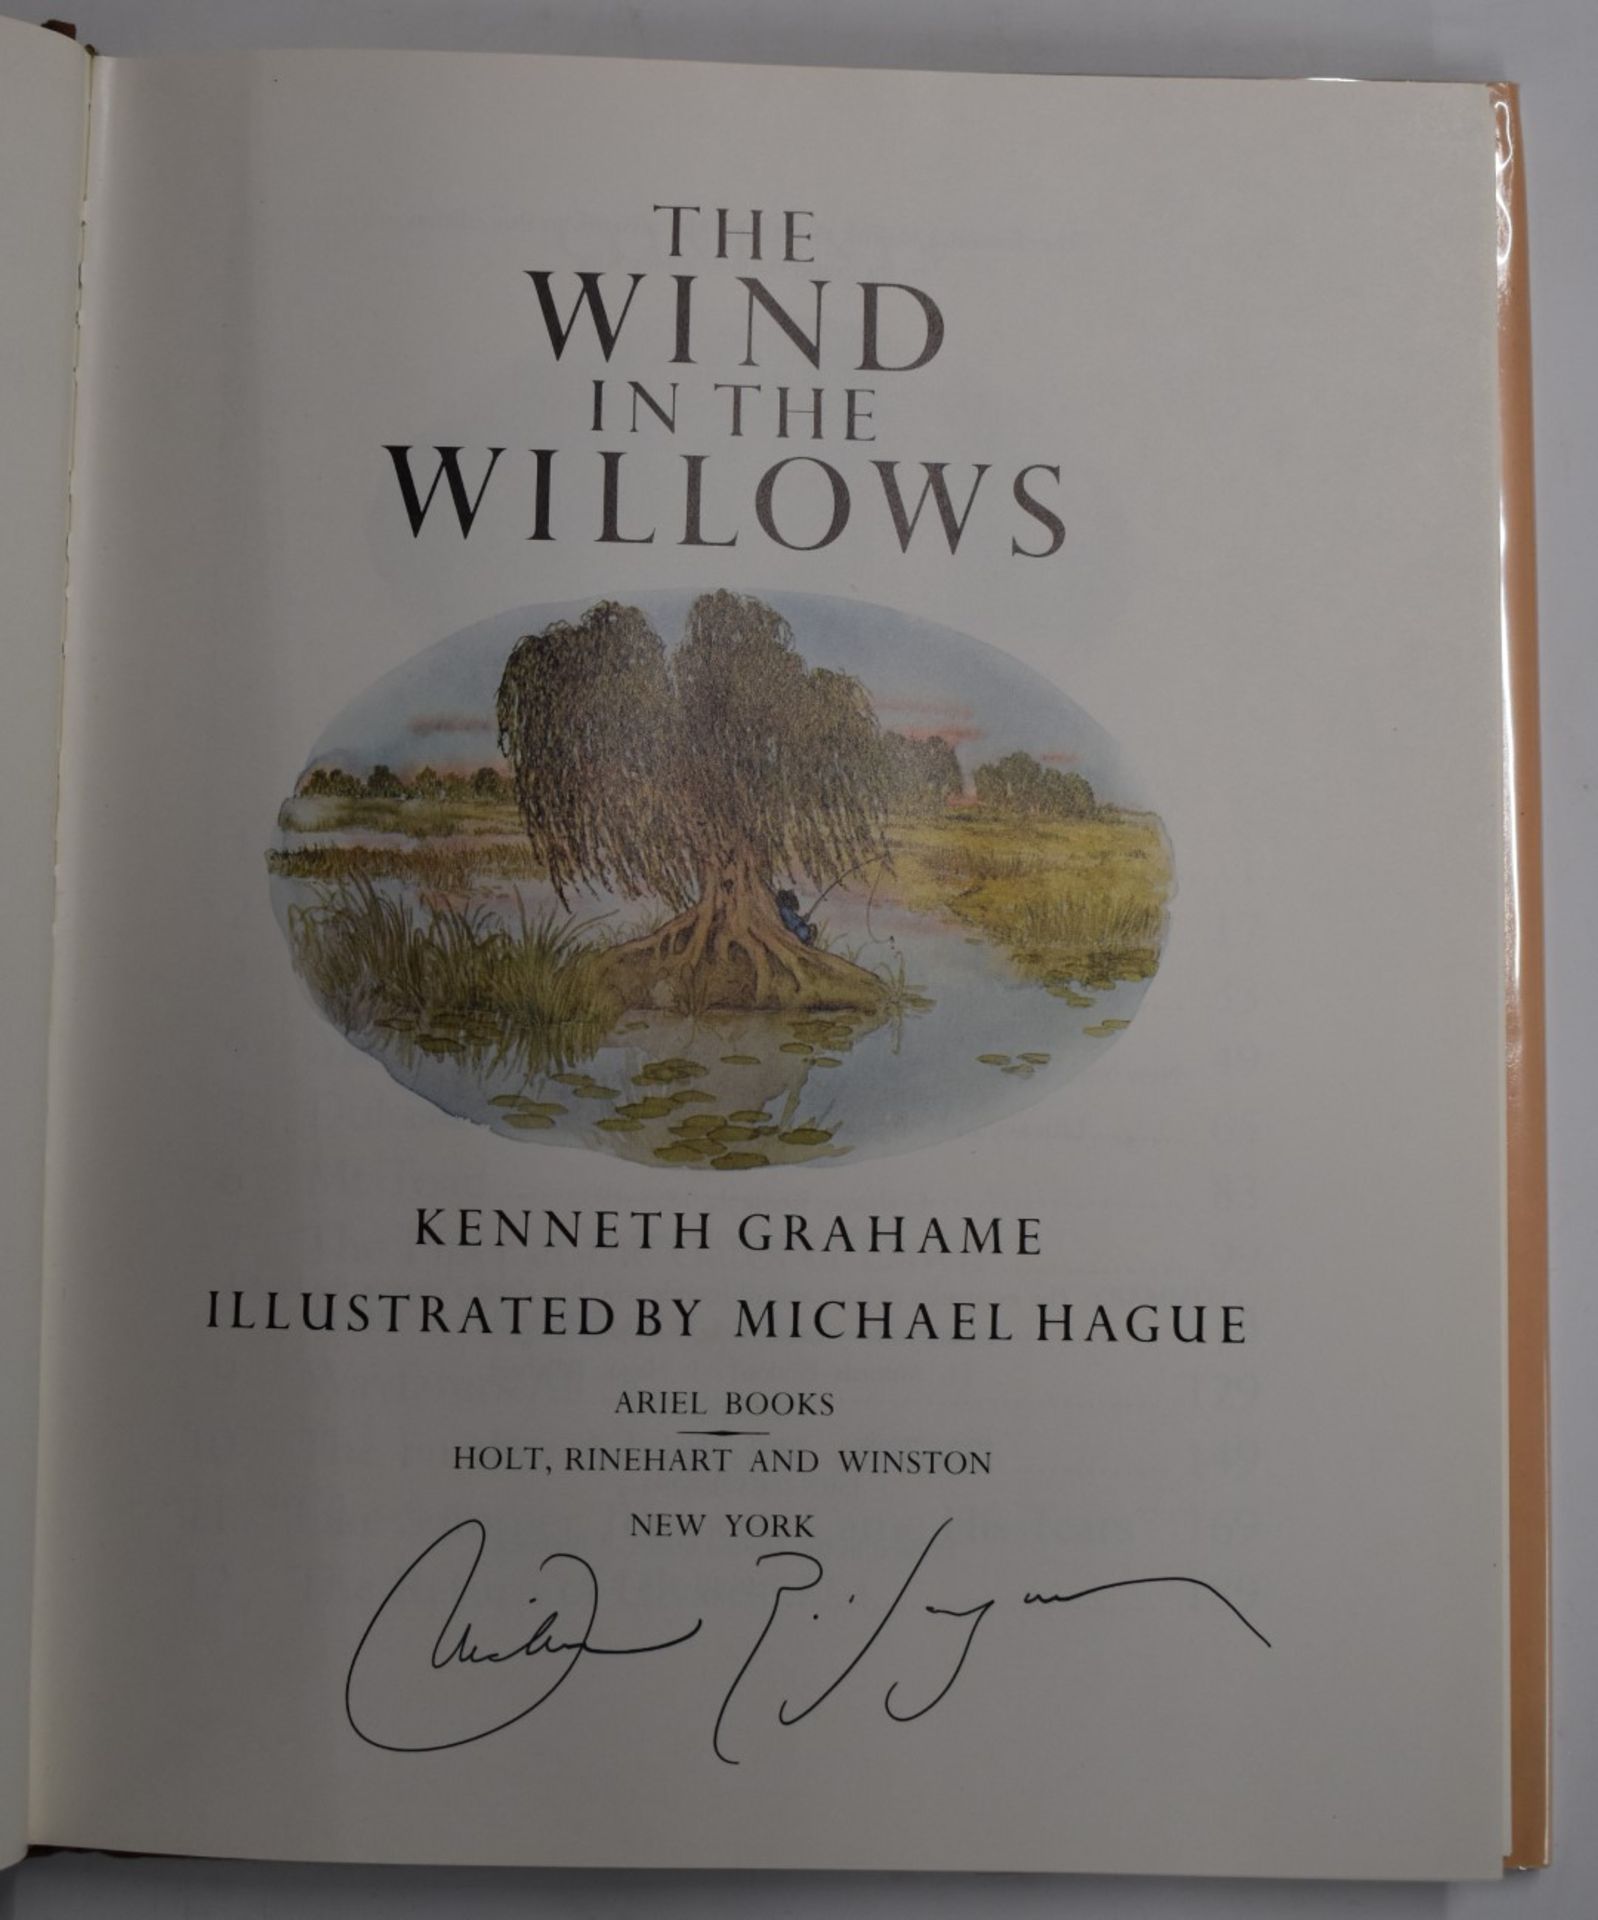 [Signed] The Wind In The Willows by Kenneth Grahame illustrated by Michael Hague, published Ariel - Image 3 of 4